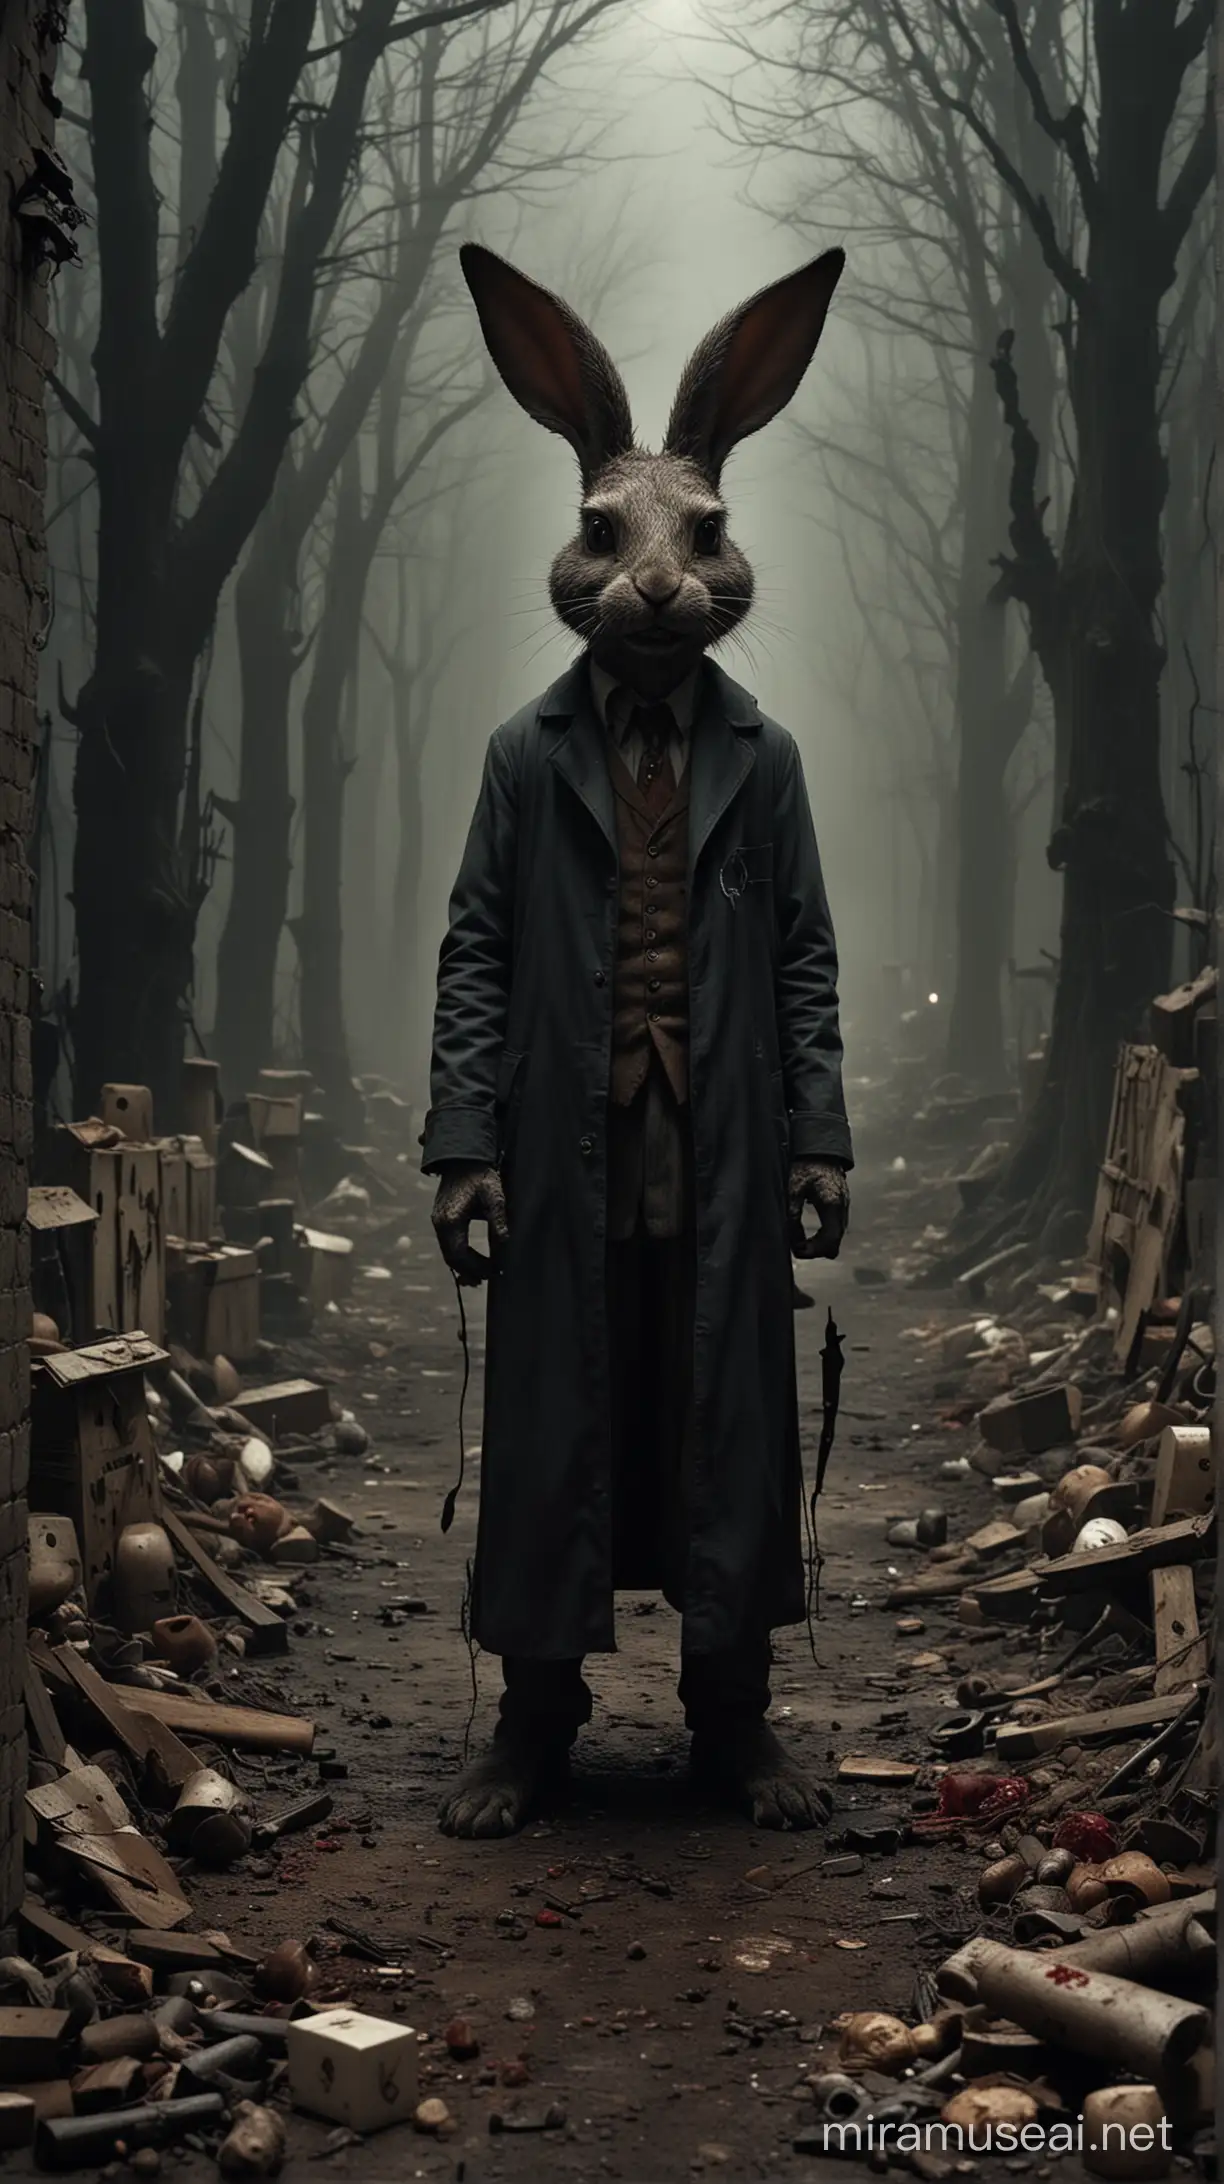 
In the eerie scene, the rabbit figure known as Frank stands amidst a backdrop of macabre elements, enhancing his mysterious and terrifying presence. Surrounding him are broken toys, twisted and contorted into grotesque shapes, adding to the unsettling atmosphere. Sinister jack-in-the-boxes litter the scene, their lids popping open to reveal horrifying surprises within.

Blood stains the environment, stark against the bleak backdrop, hinting at dark deeds and ominous occurrences. The air is thick with a sense of foreboding, as if the very shadows themselves are alive with malevolent intent.

Frank's appearance is intensified by his eyes, which blaze with an otherworldly flame, casting an eerie glow that illuminates the darkness around him. His fur is matted and unkempt, devoid of any hint of cuteness, instead exuding a menacing aura that sends shivers down the spine.

His mouth curls into a malicious grin, revealing sharp teeth that glint in the dim light, hinting at a sinister intelligence lurking behind his unsettling visage. With every fiber of his being, Frank exudes an aura of fear and dread, commanding the attention of all who dare to gaze upon him in this nightmarish tableau.